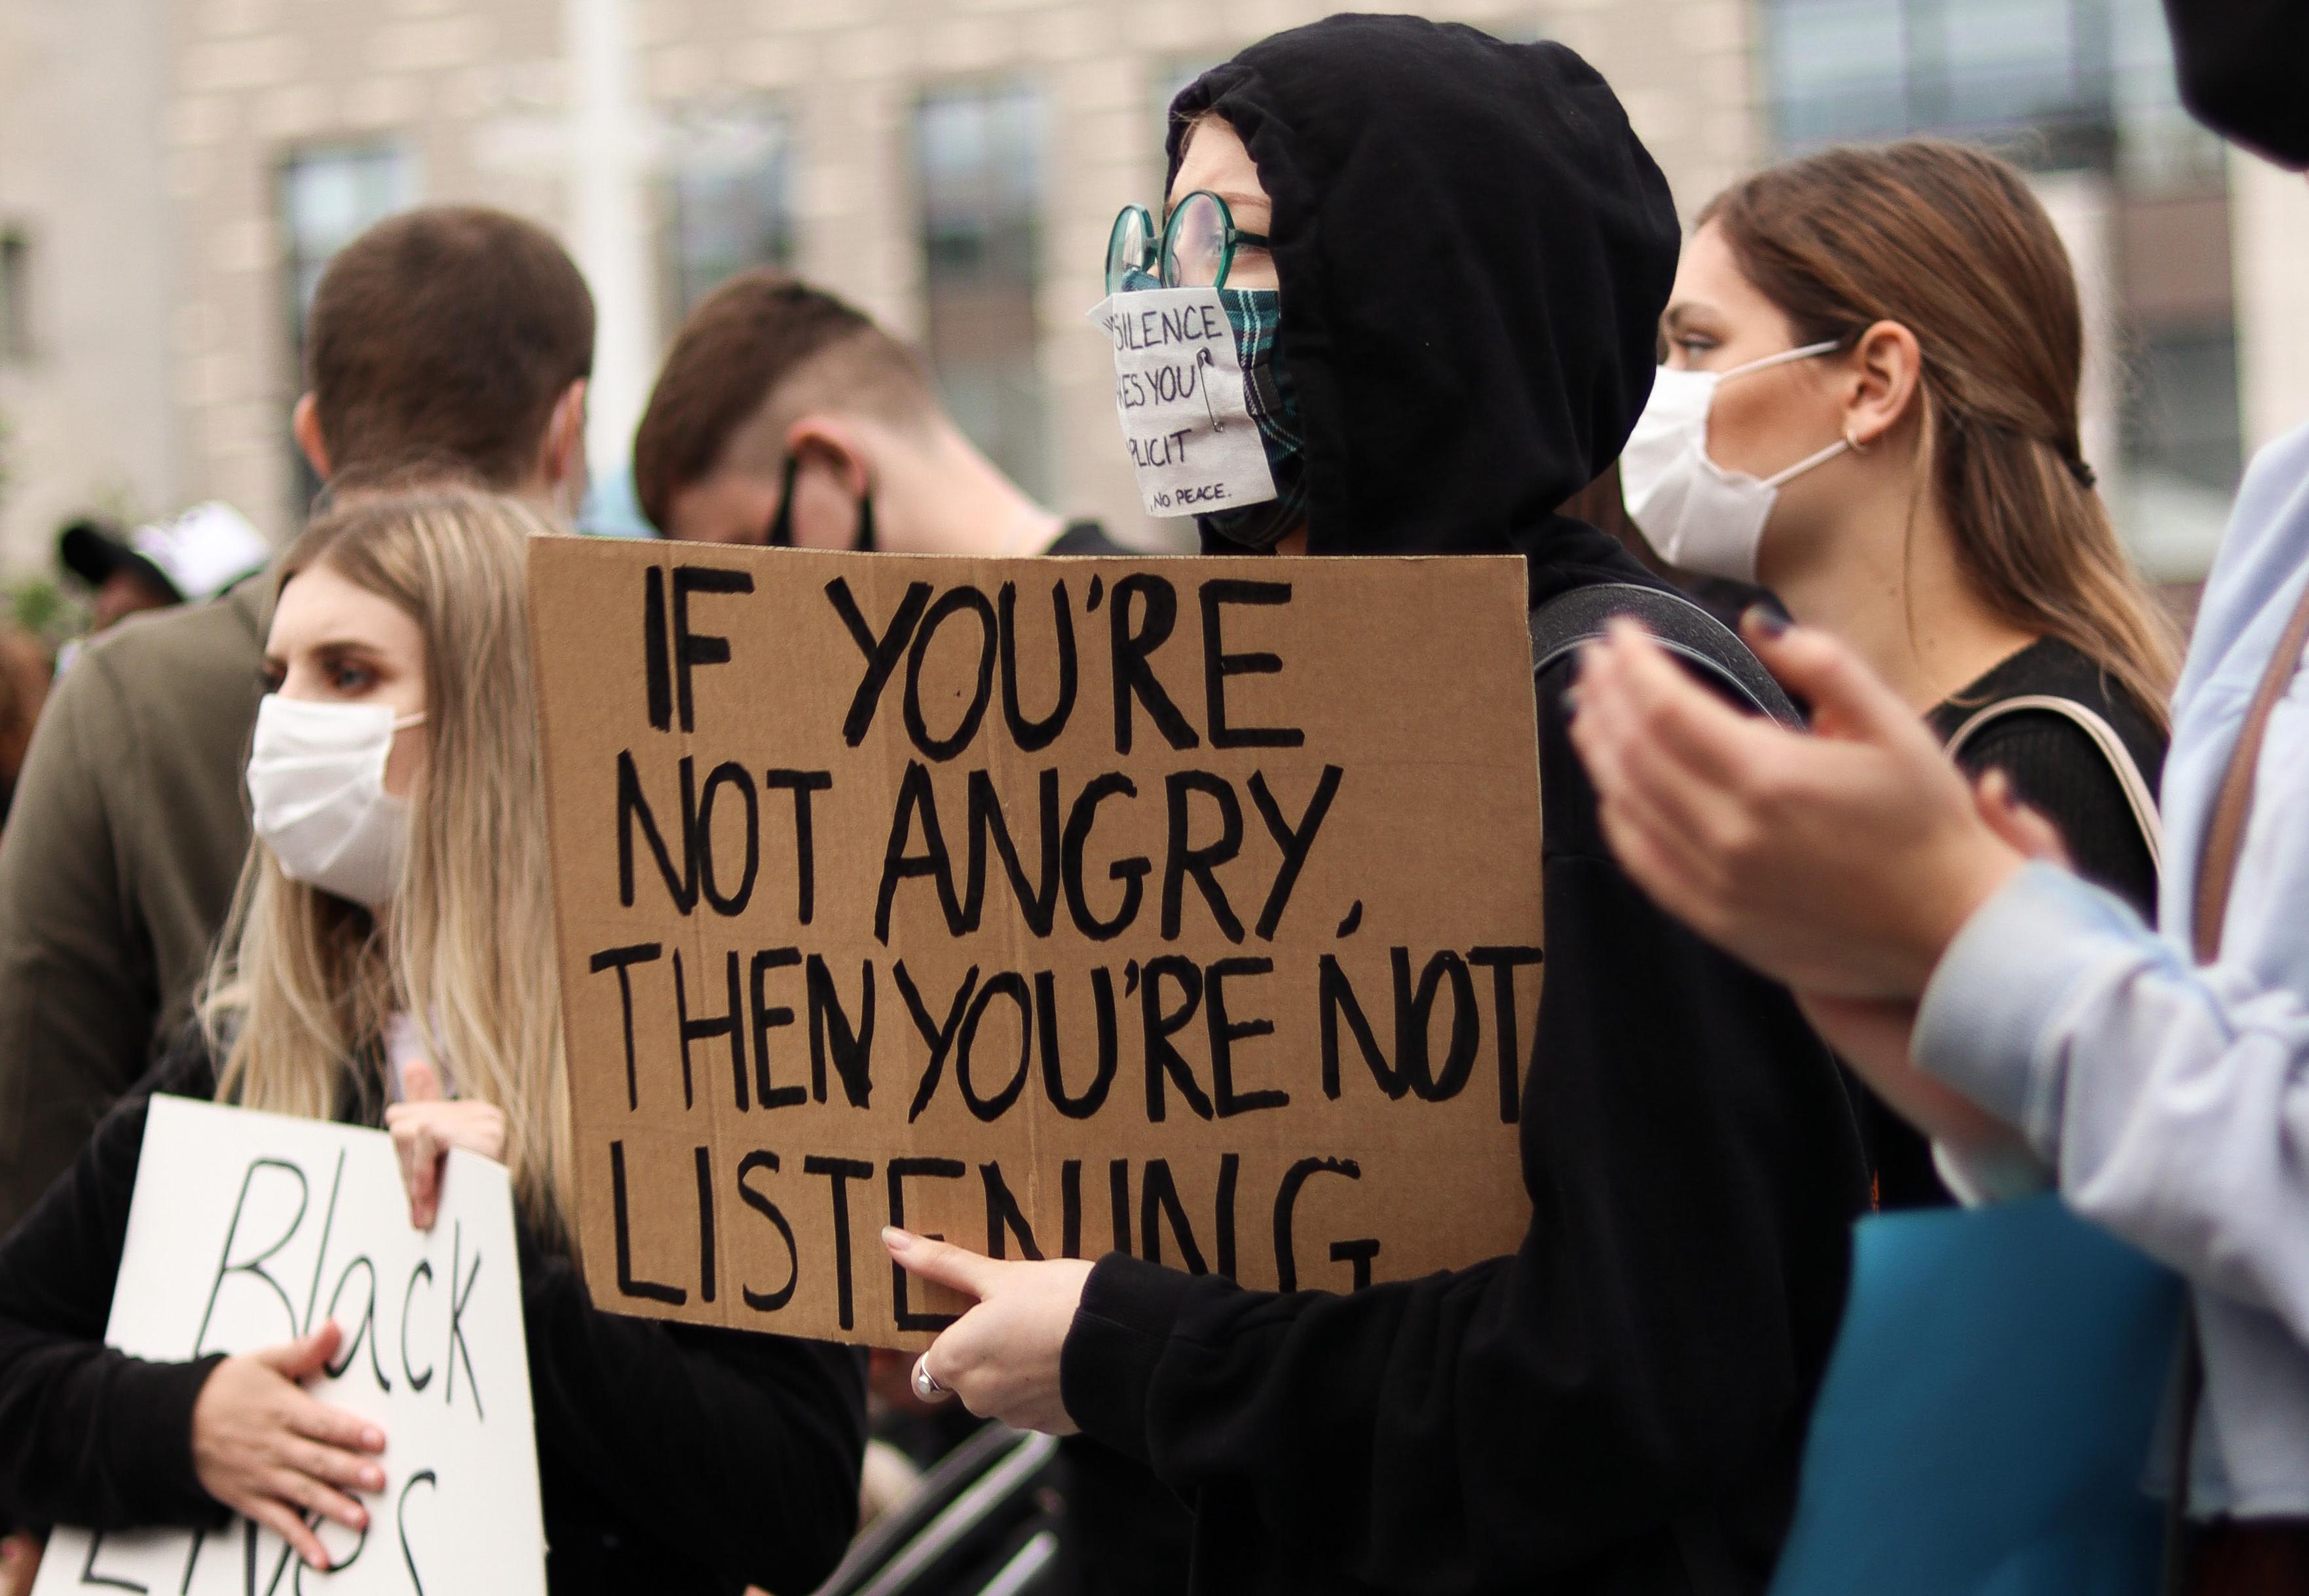 A person holding a sign that says "If you're not angry, then you're not listening."